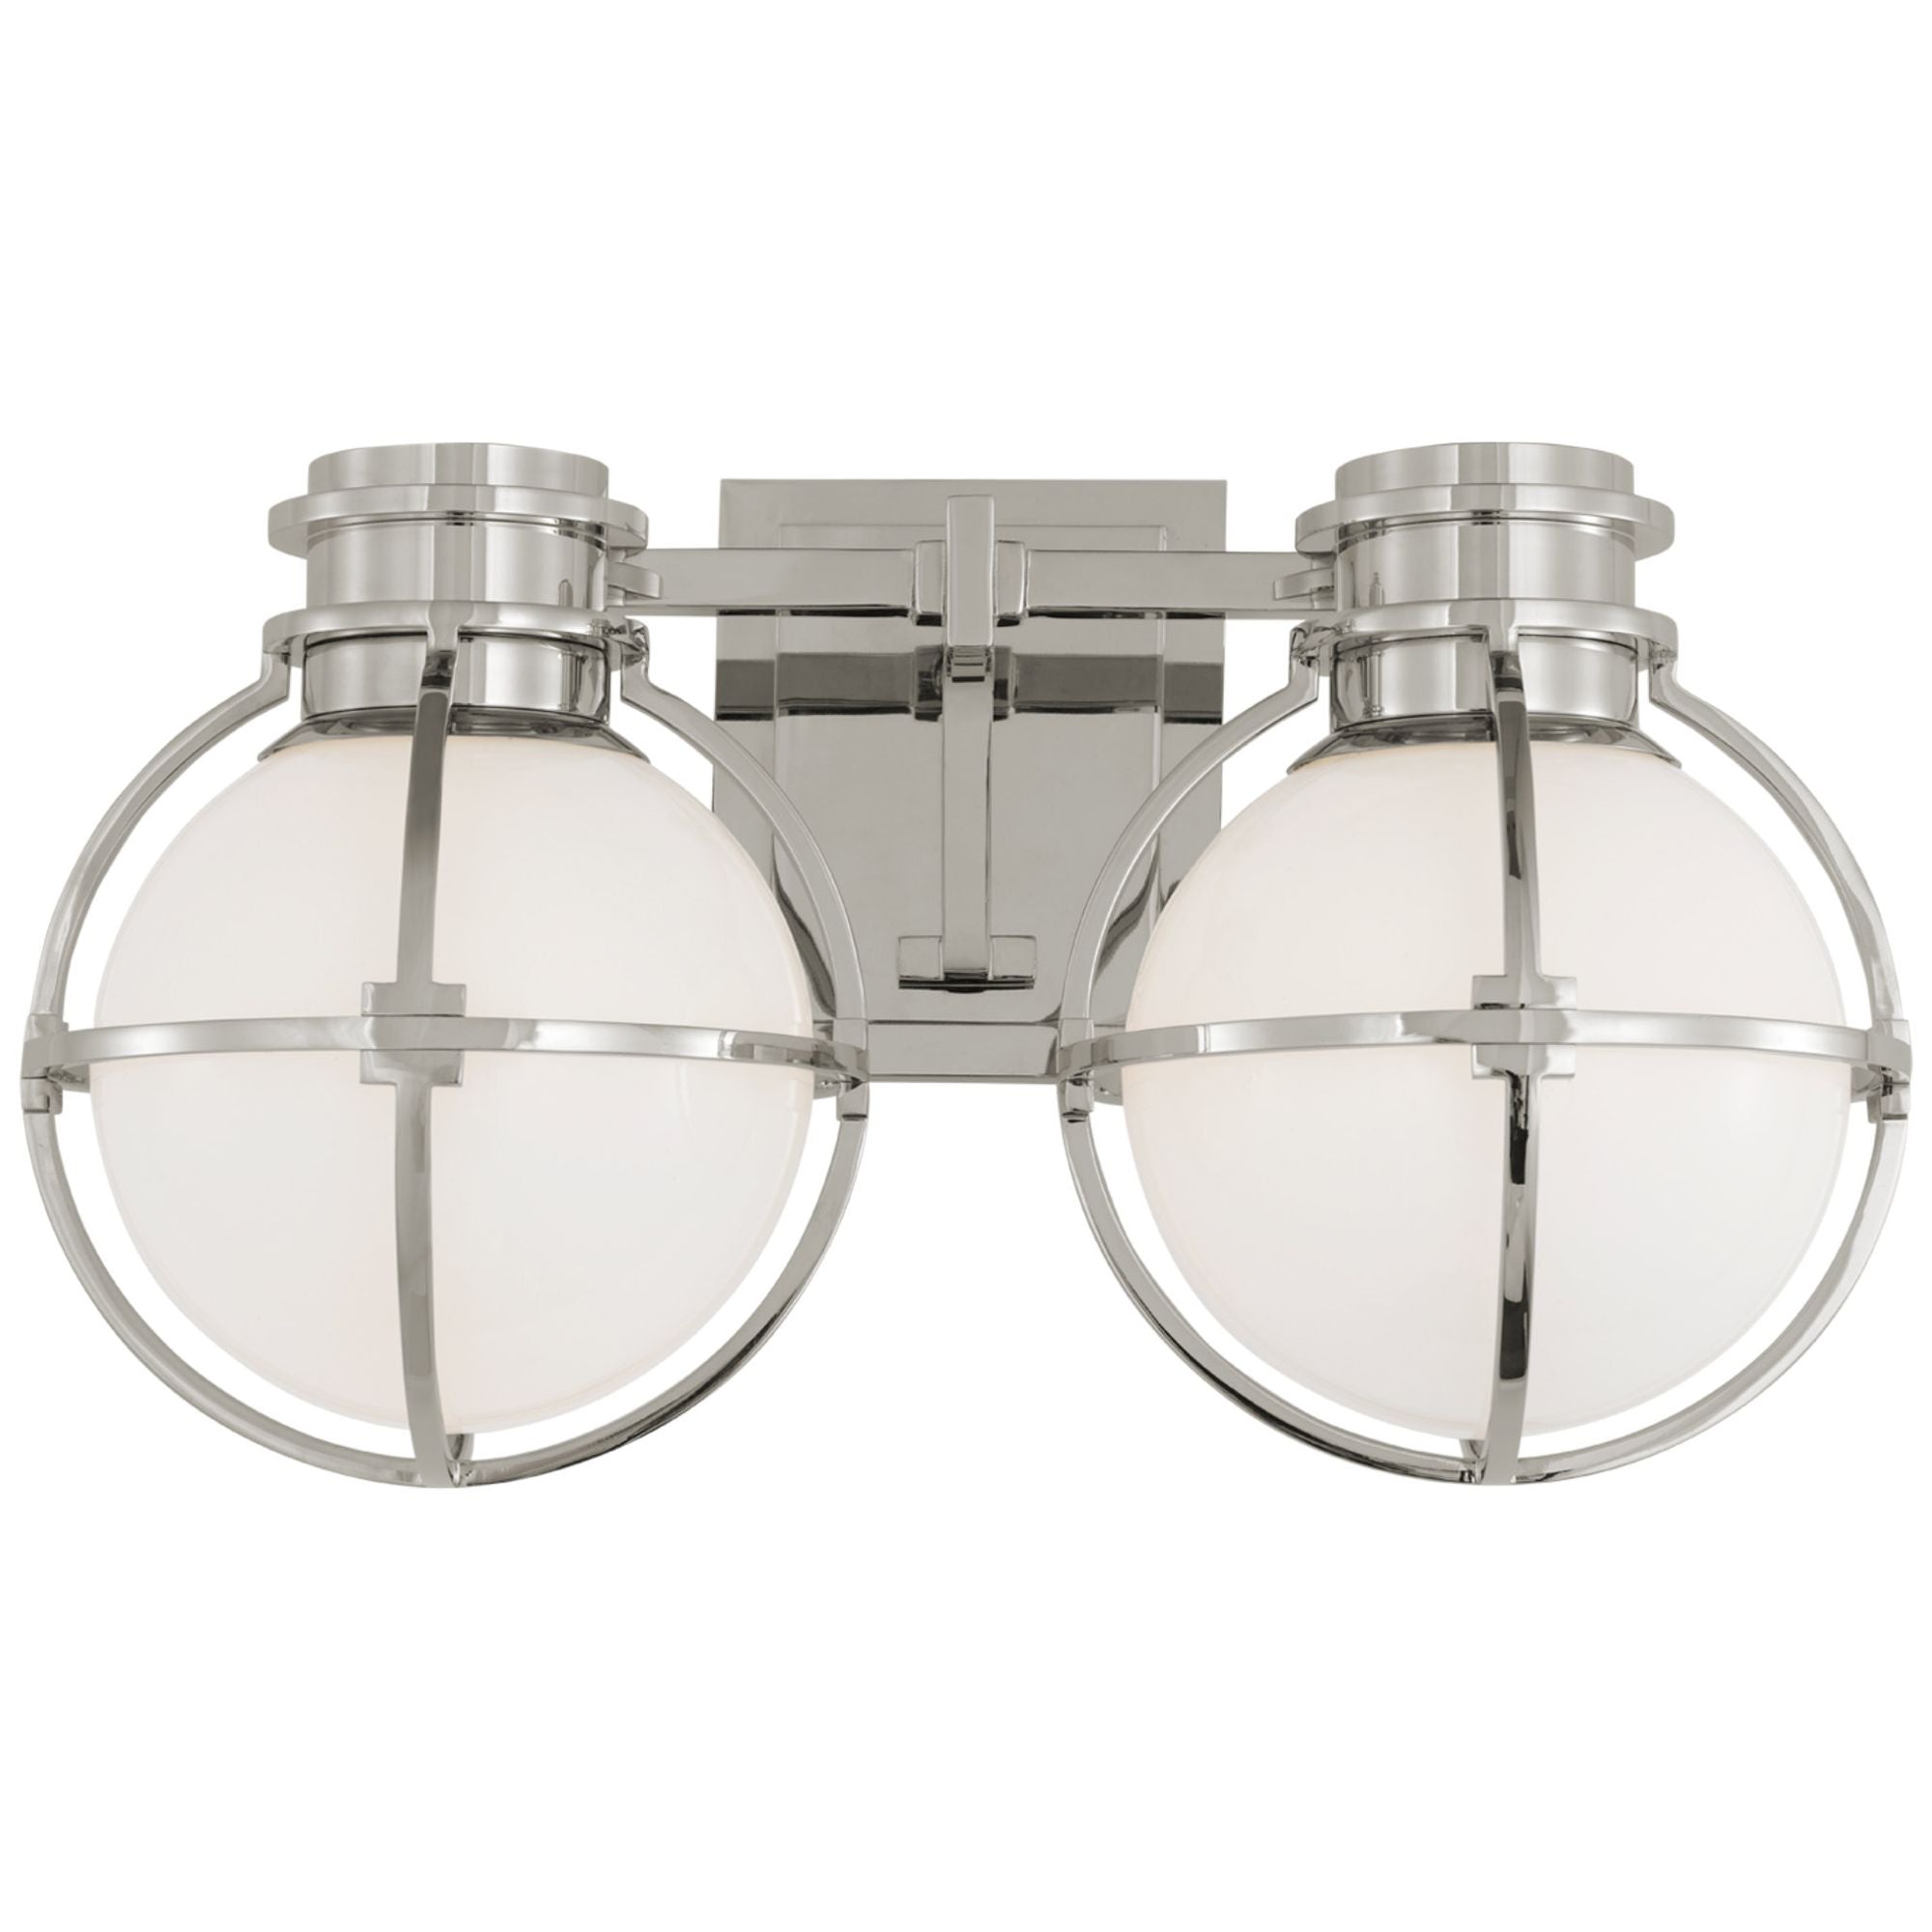 Chapman & Myers Gracie Double Sconce in Polished Nickel with White Glass